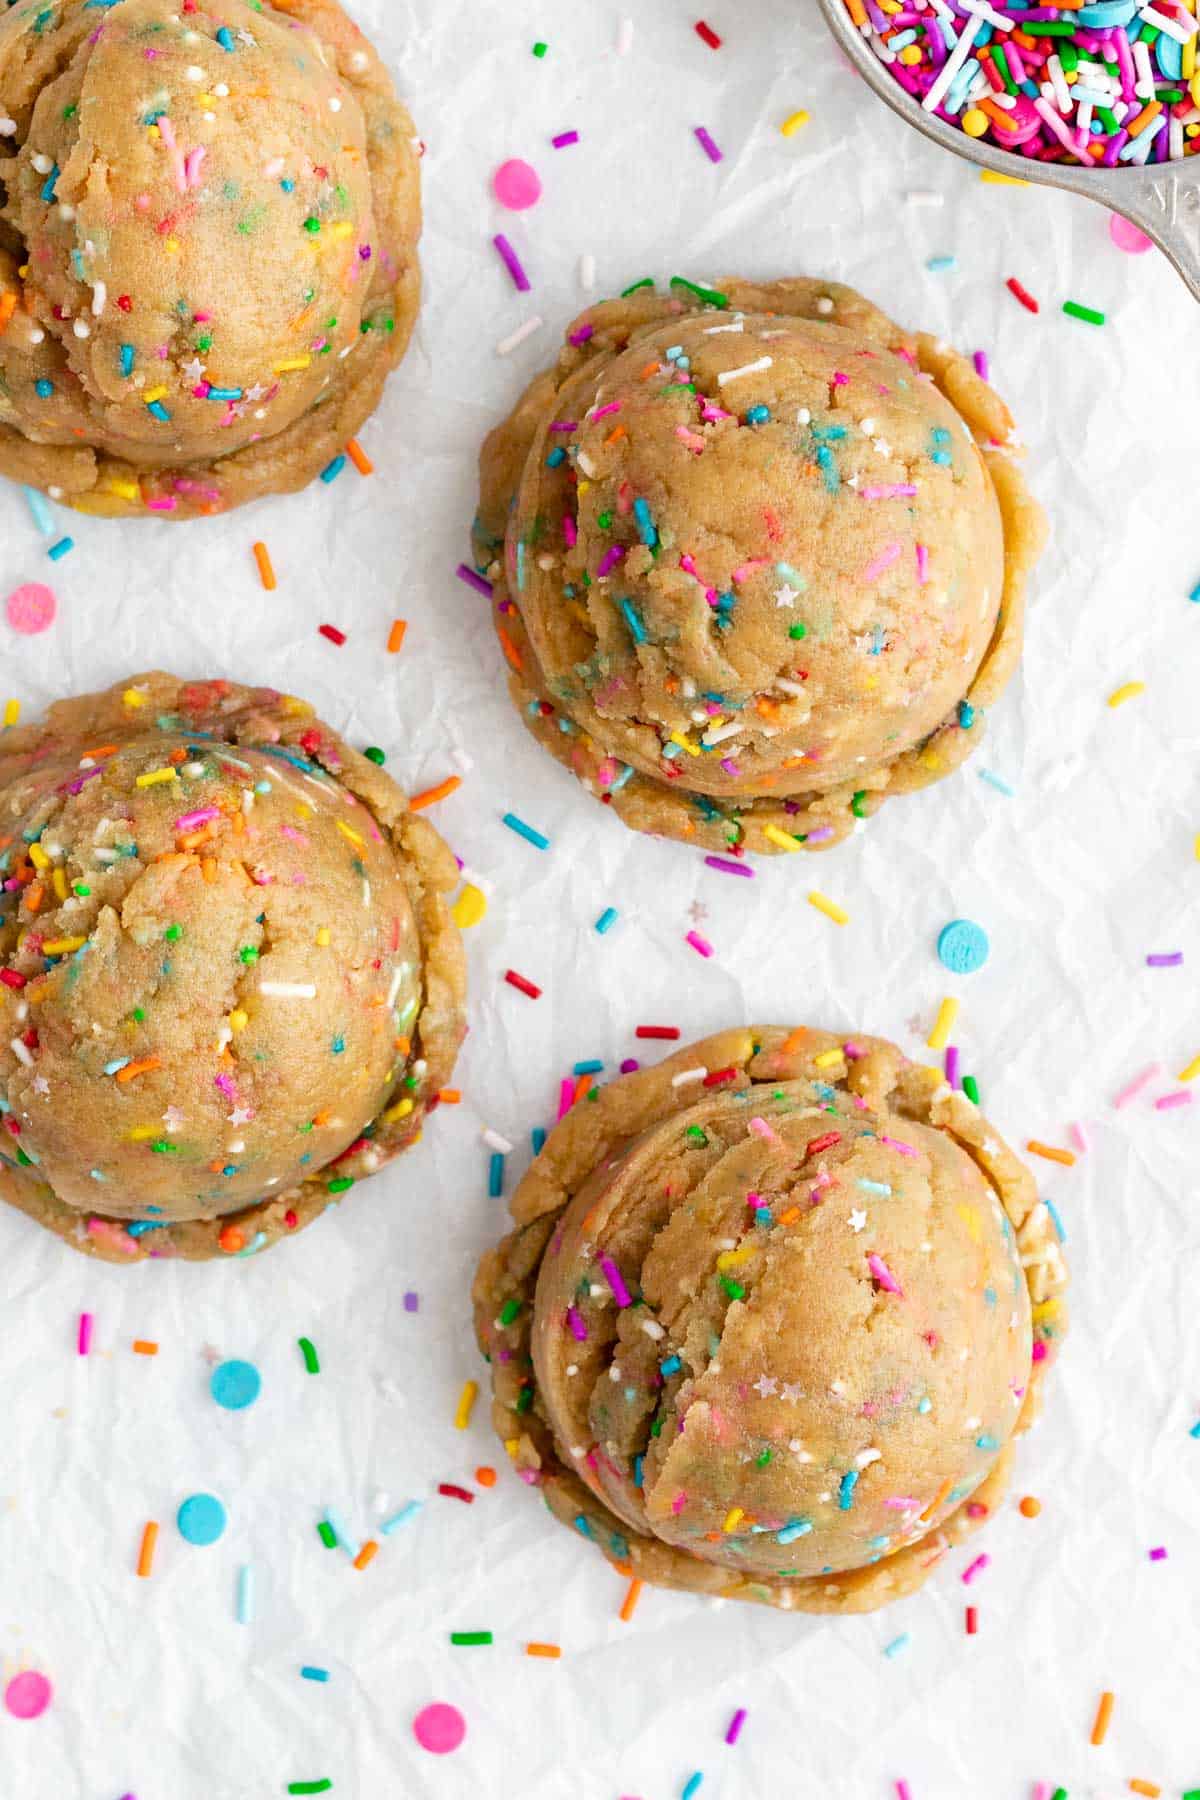 four large rounds of edible funfetti cookie dough with vegan rainbow sprinkles